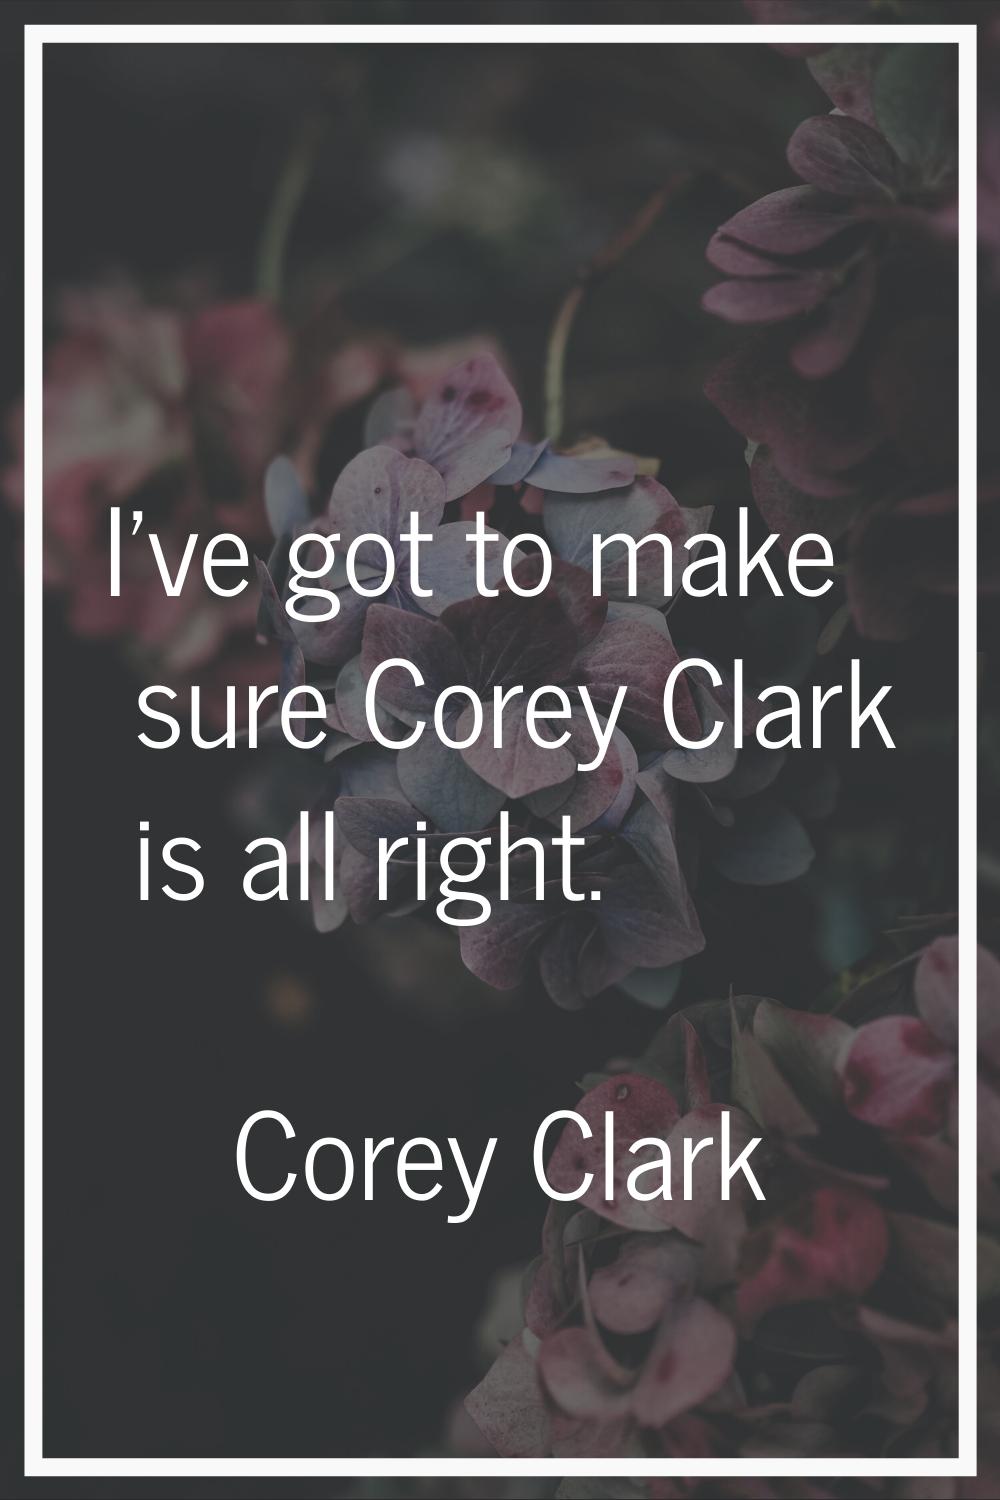 I've got to make sure Corey Clark is all right.